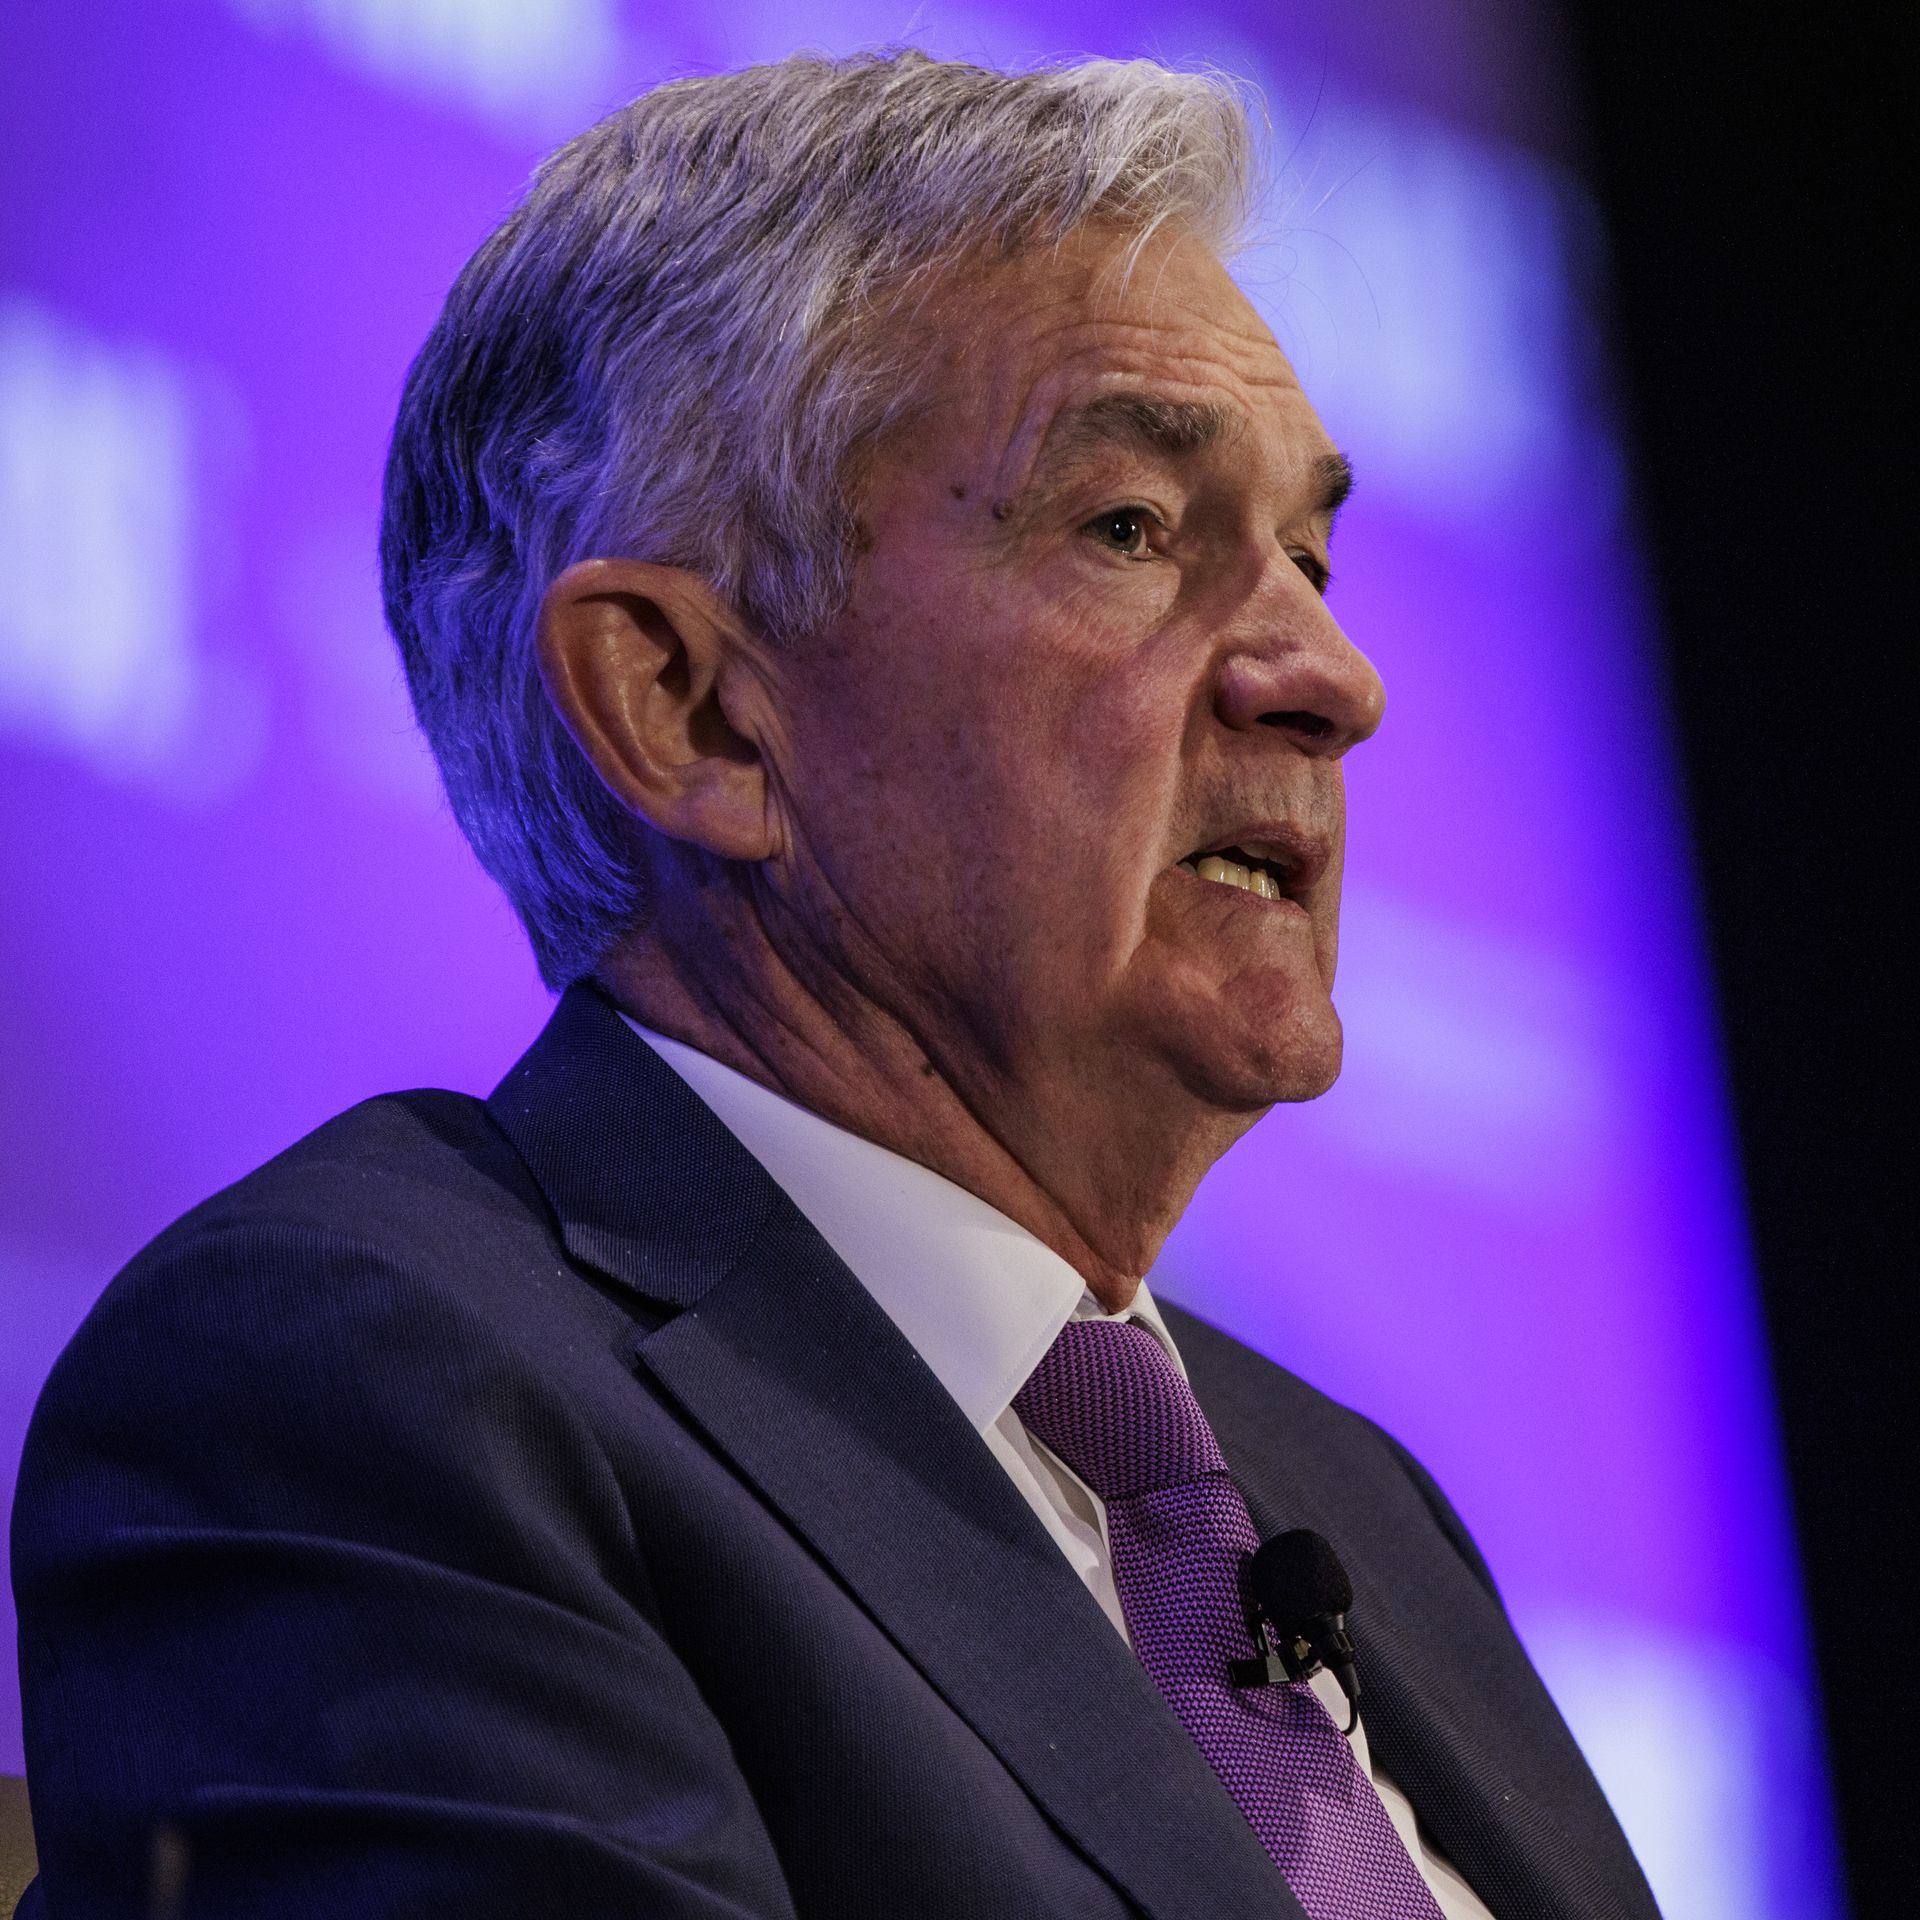 Fed chairman Jerome Powell speaks onstage at a conference